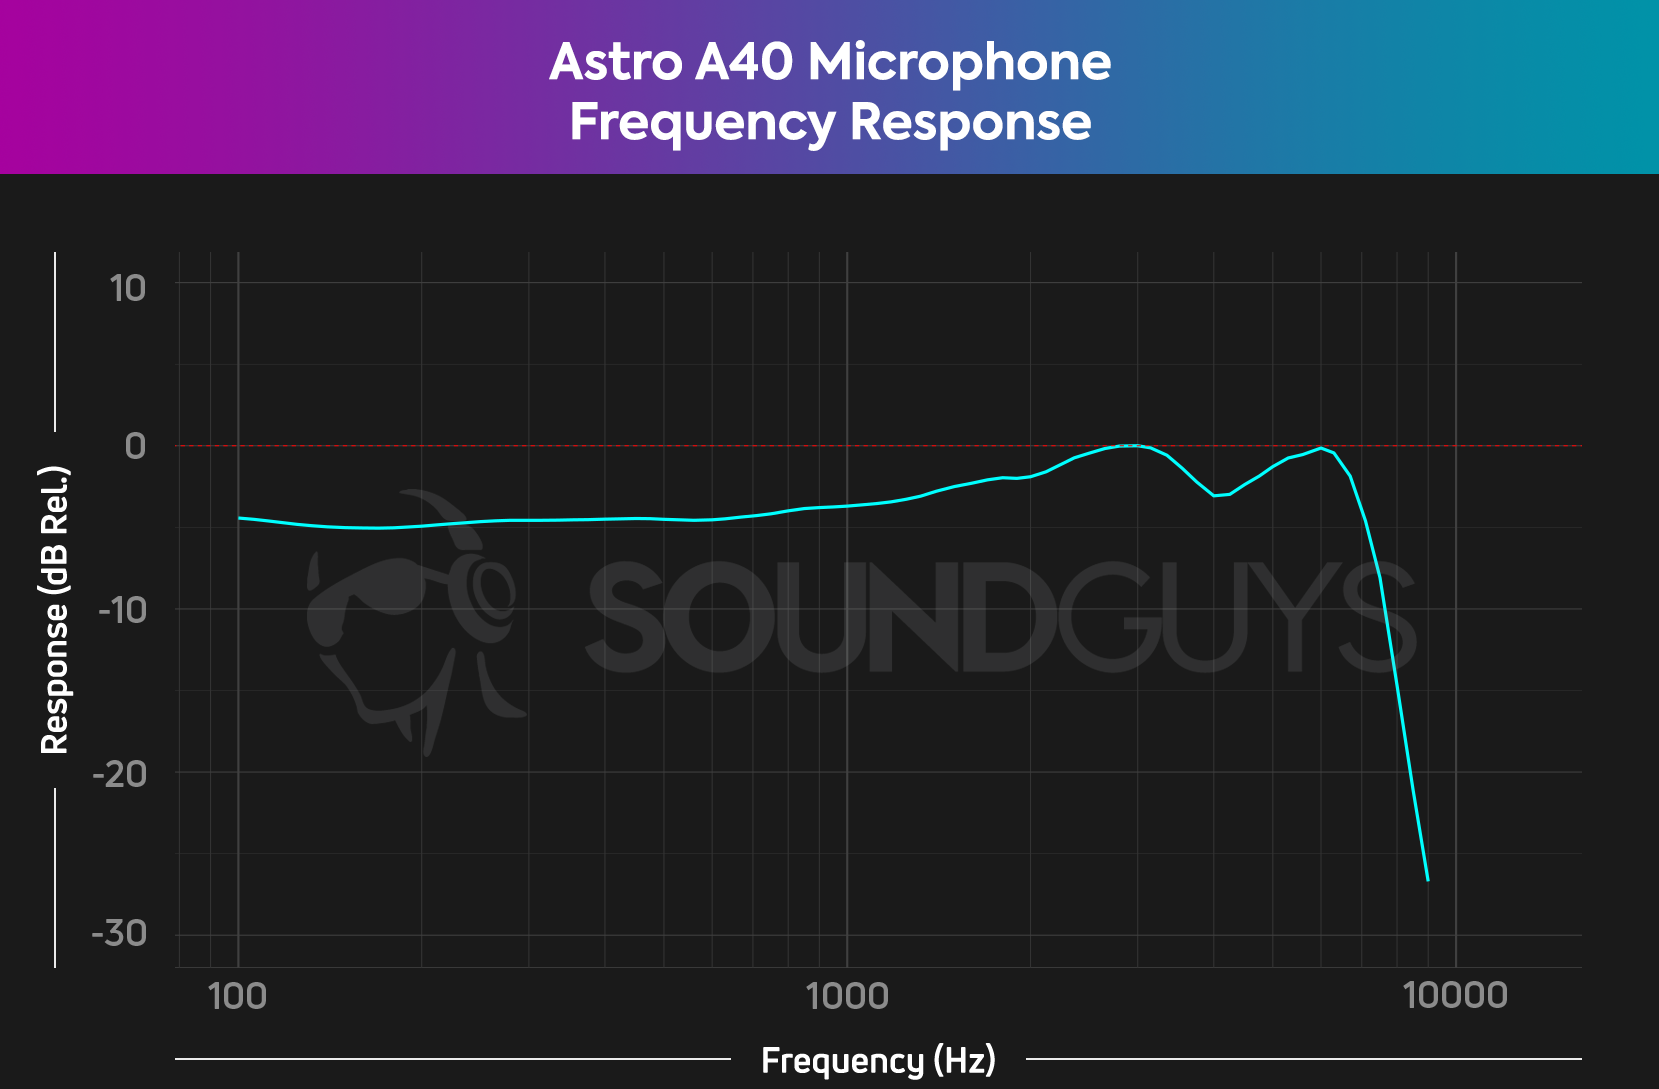 Astro A40 microphone frequency response chart showing fairly even response across the spectrum before a sharp decline around 8Khz. 